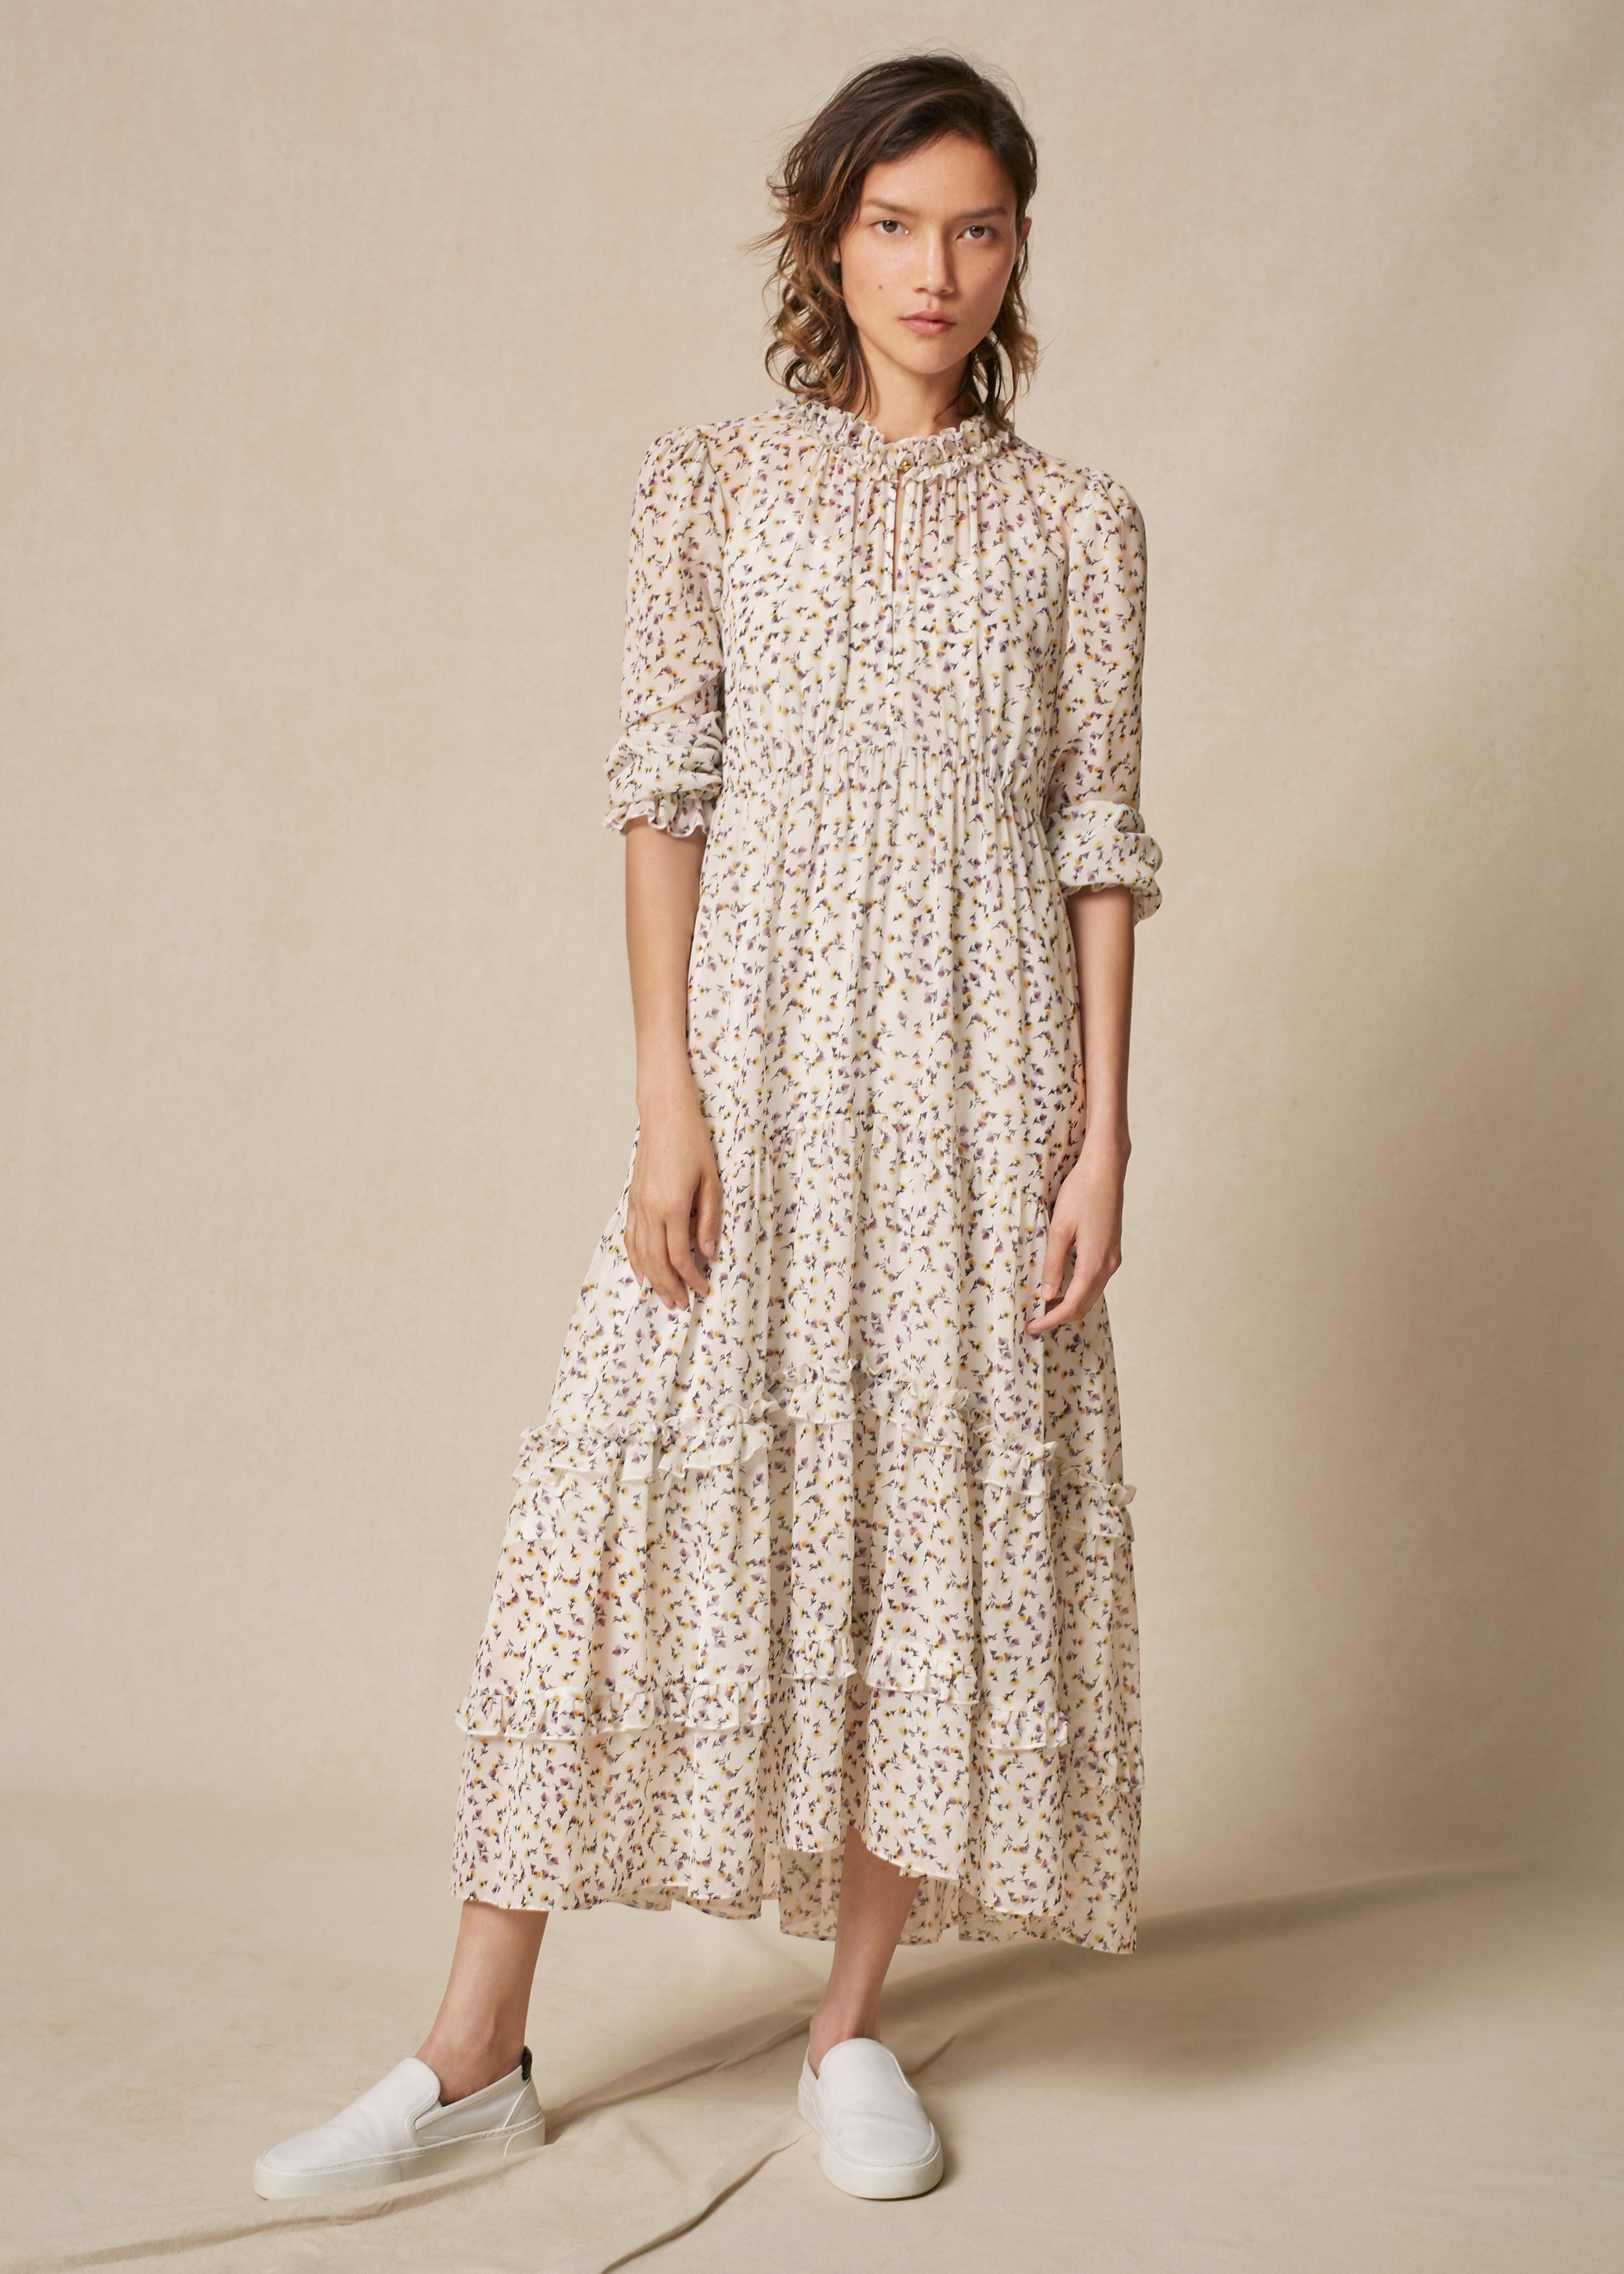 Wild Meadow Floral Print Overlay Dress Soft White